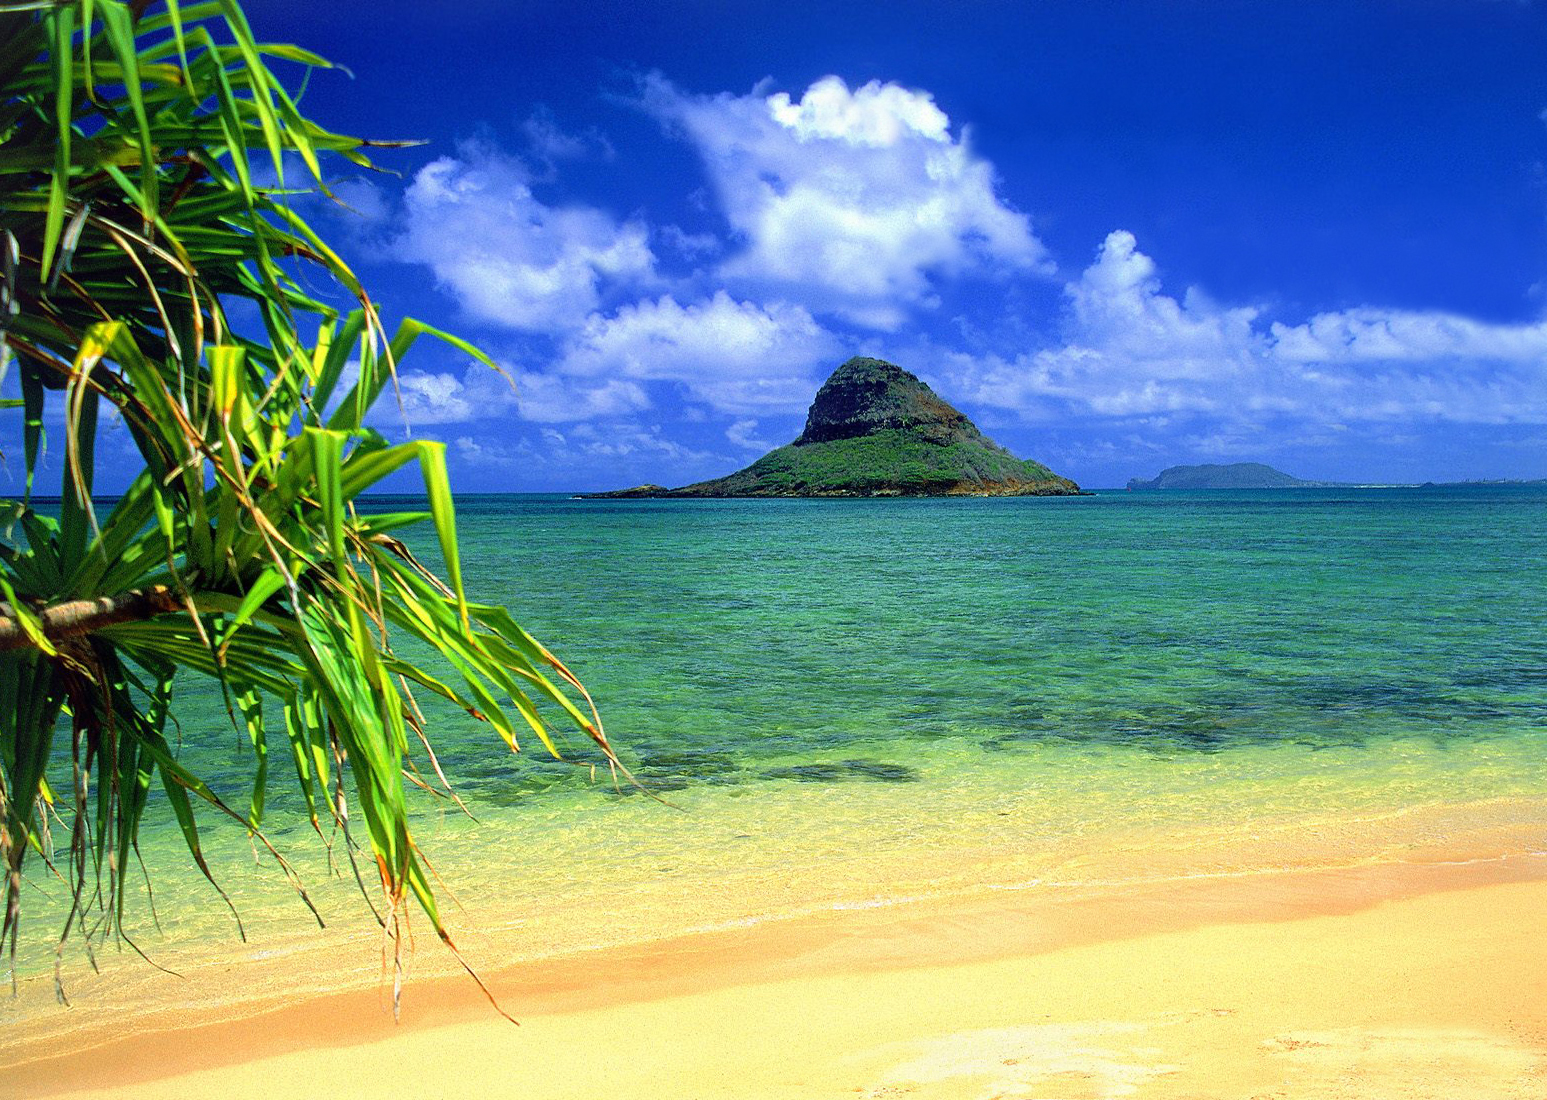 Hawaii Beaches Background Image Amp Pictures Becuo